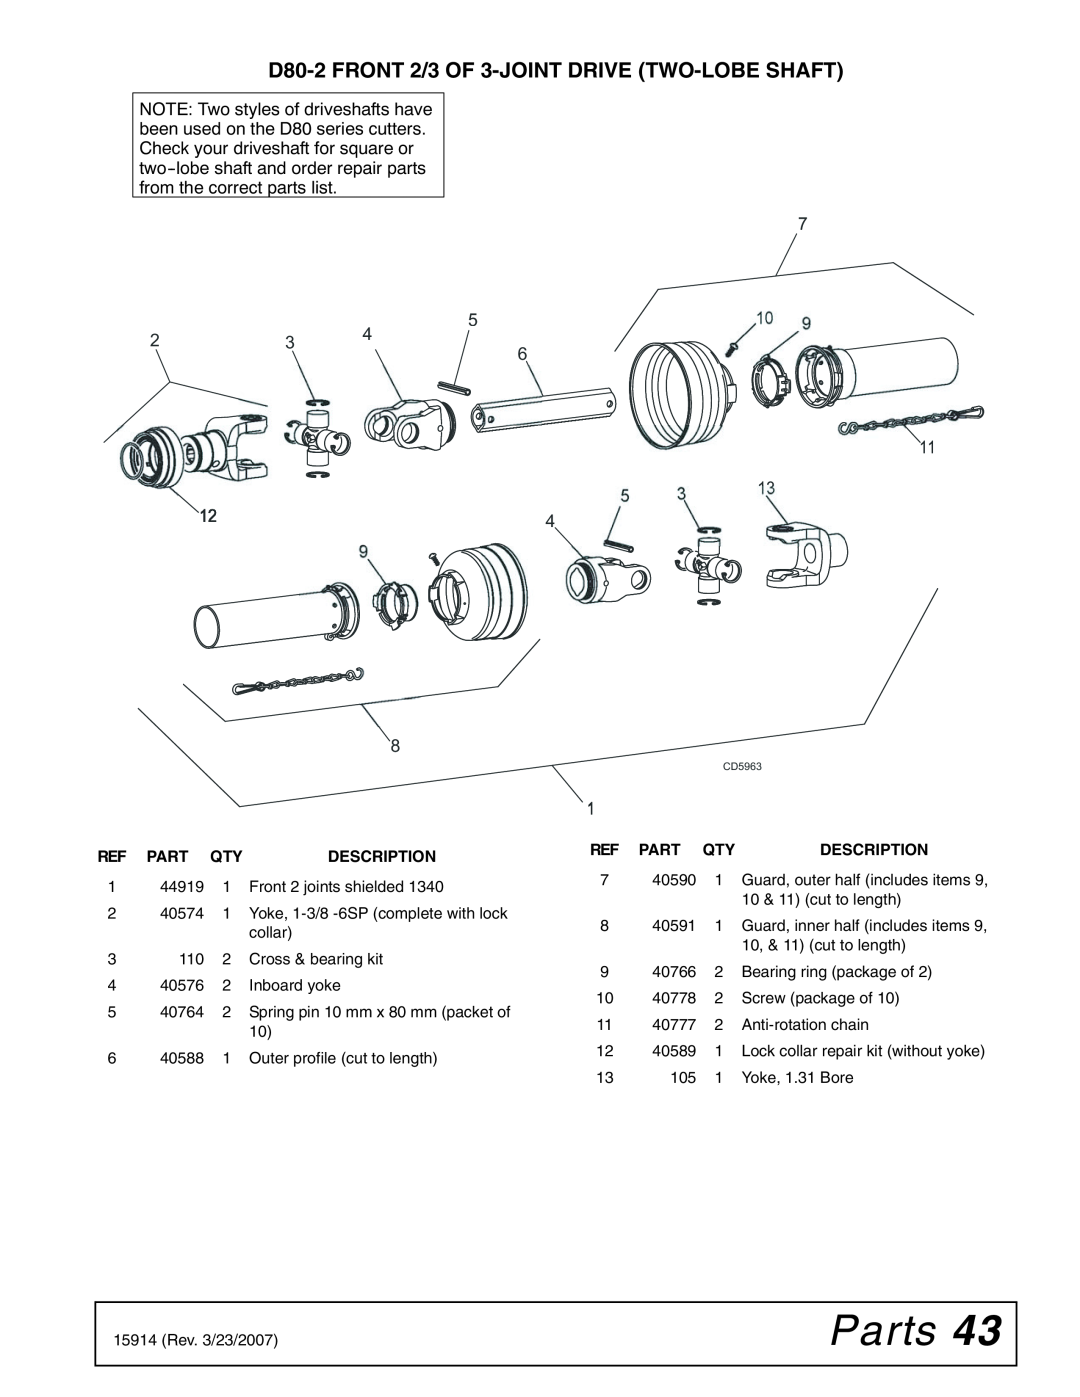 Woods Equipment MD80-2 manual Parts, D80-2FRONT 2/3 OF 3-JOINTDRIVE TWO-LOBESHAFT, Description 